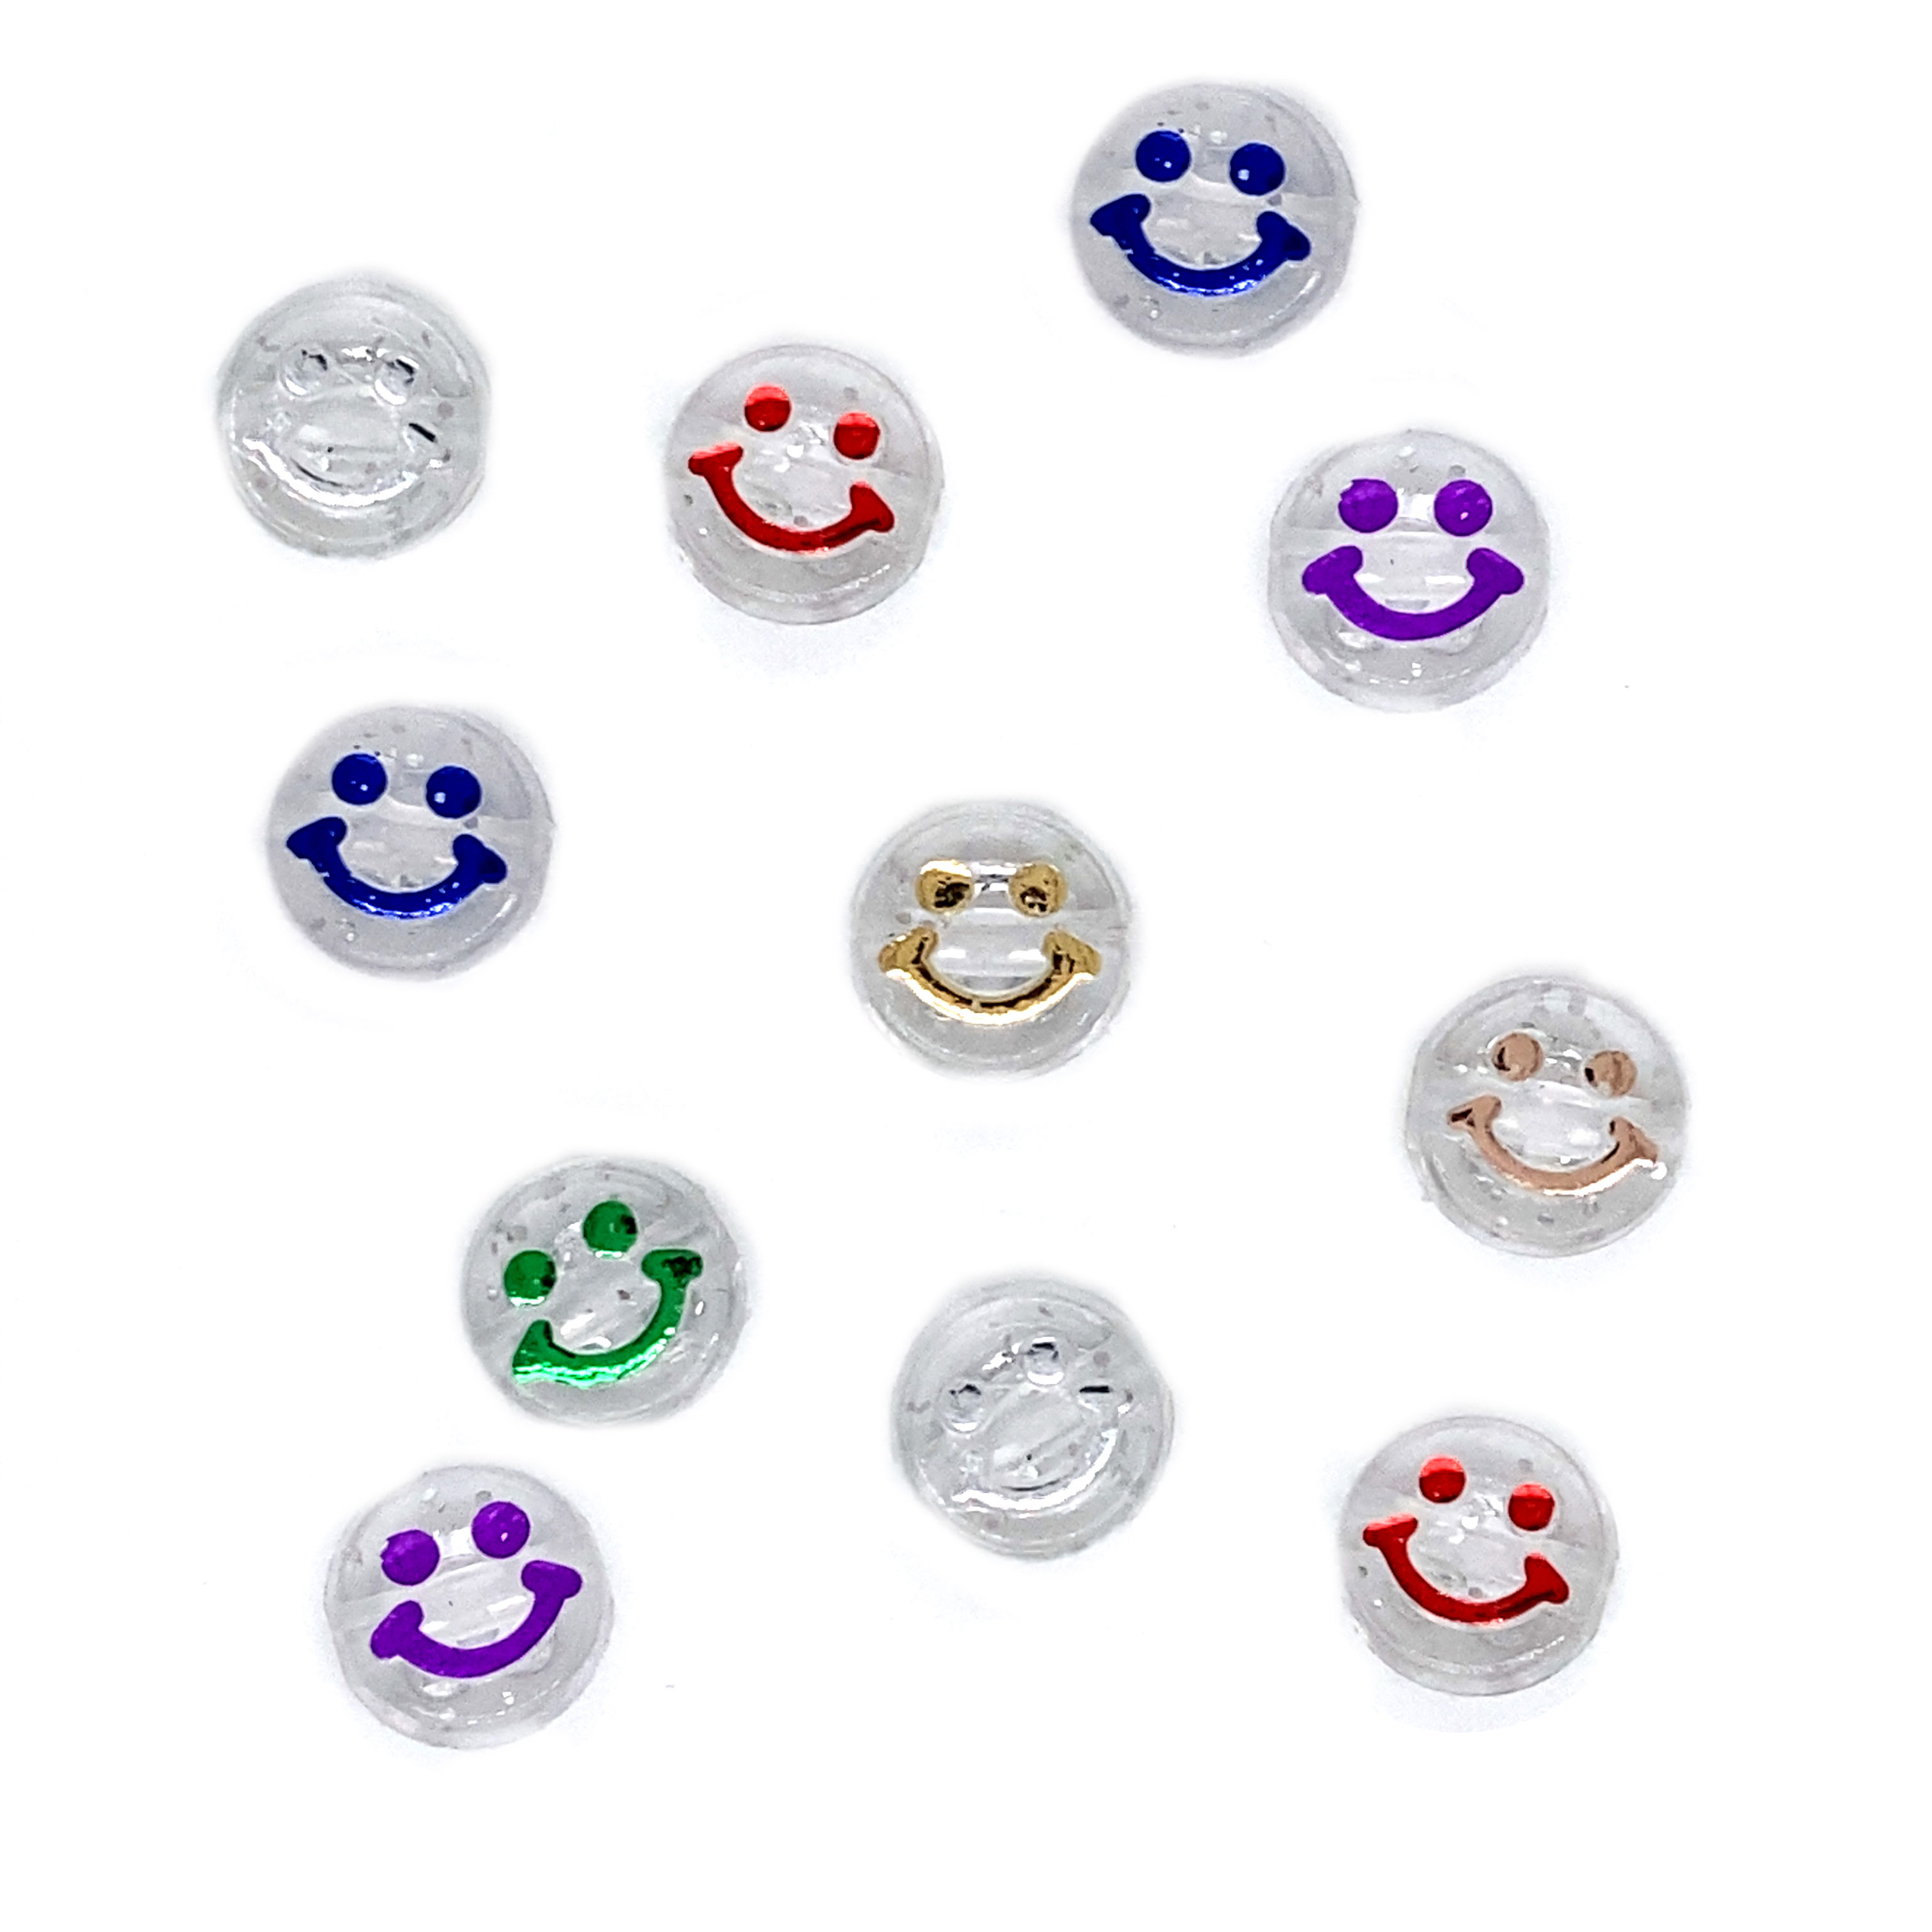 Acrylic Metallic Smiley Beads - Assorted Pack - Approx. 100 pcs